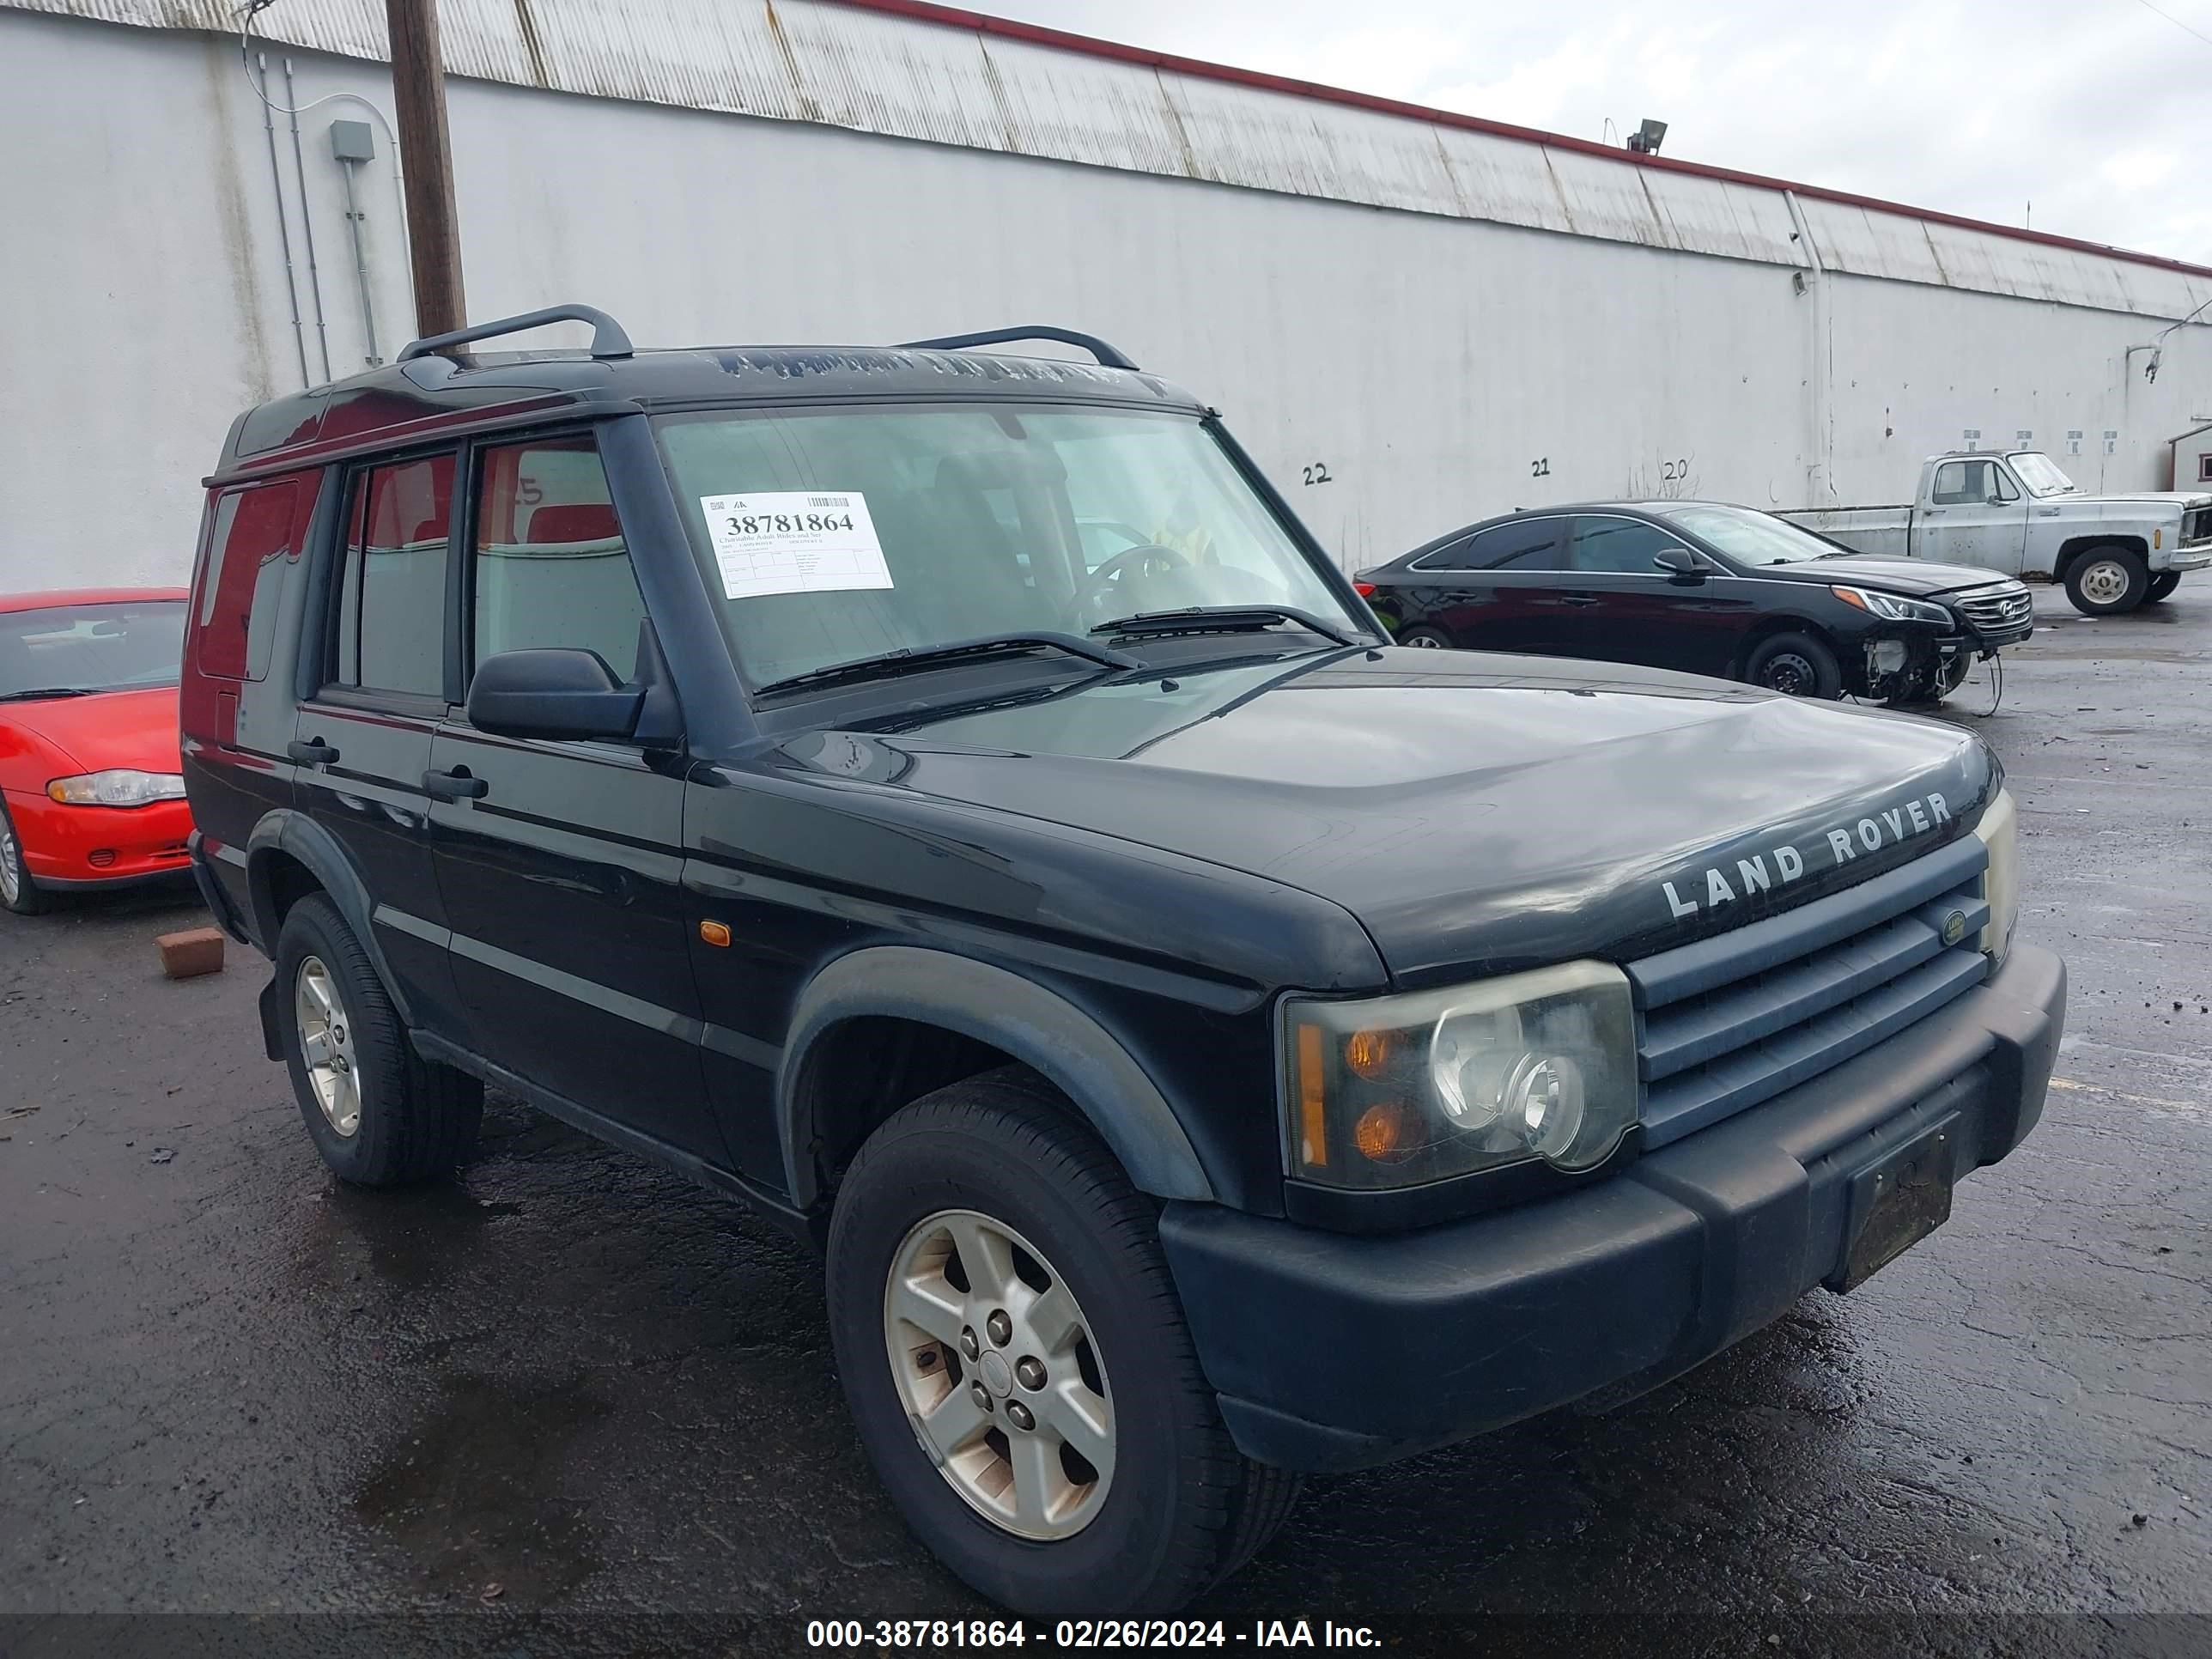 land rover discovery 2003 saltl16413a821037